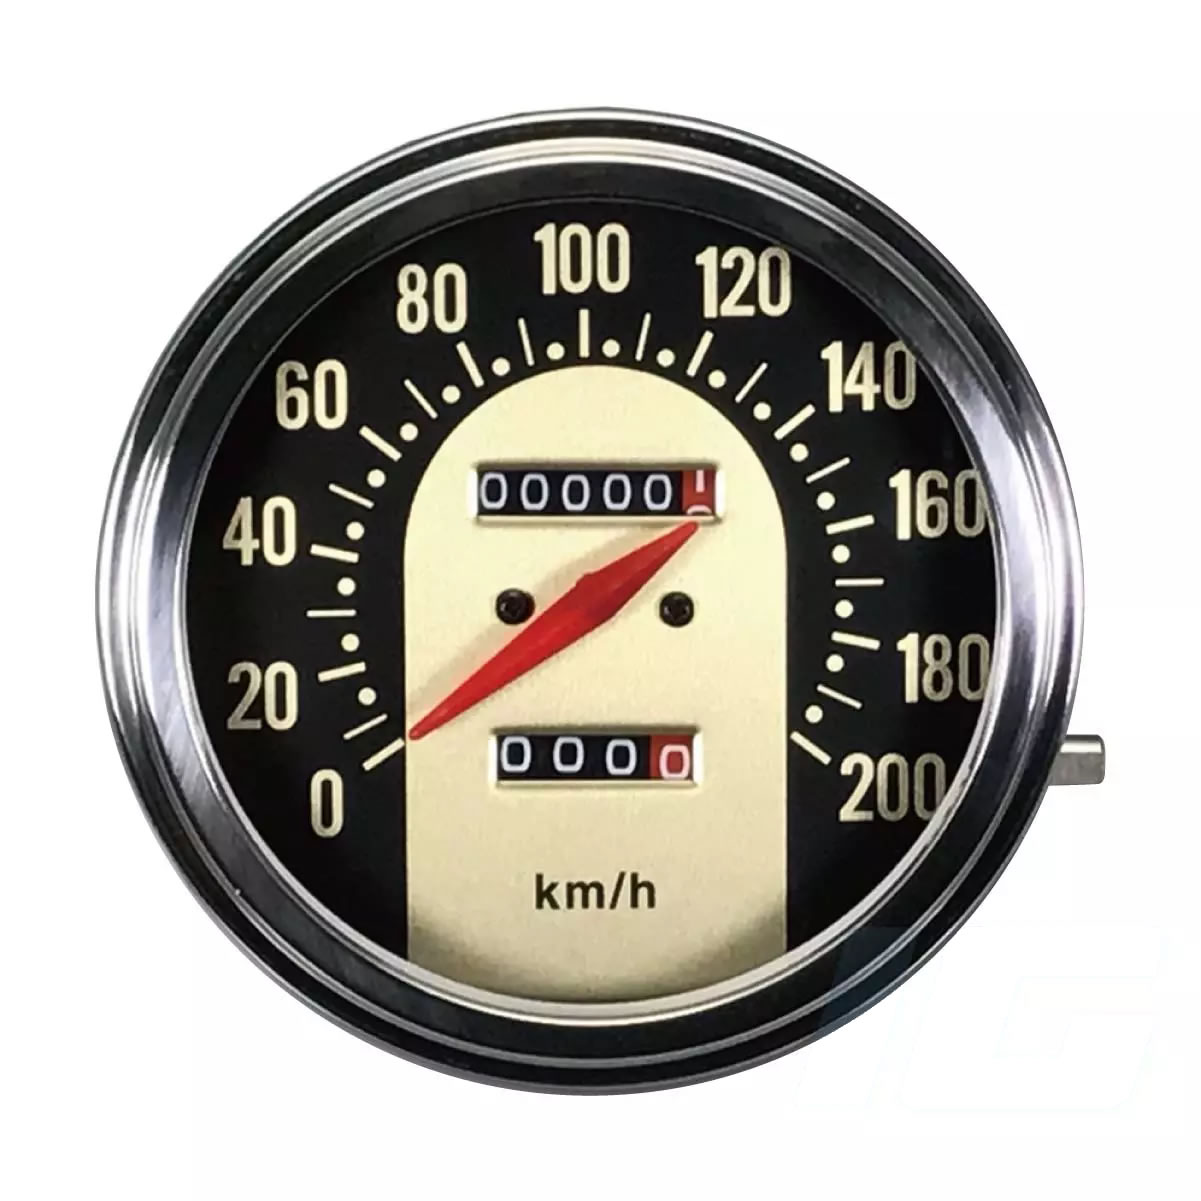 Mechanical Speedometer Build-In Odometer and Trimeter For Motorcycle